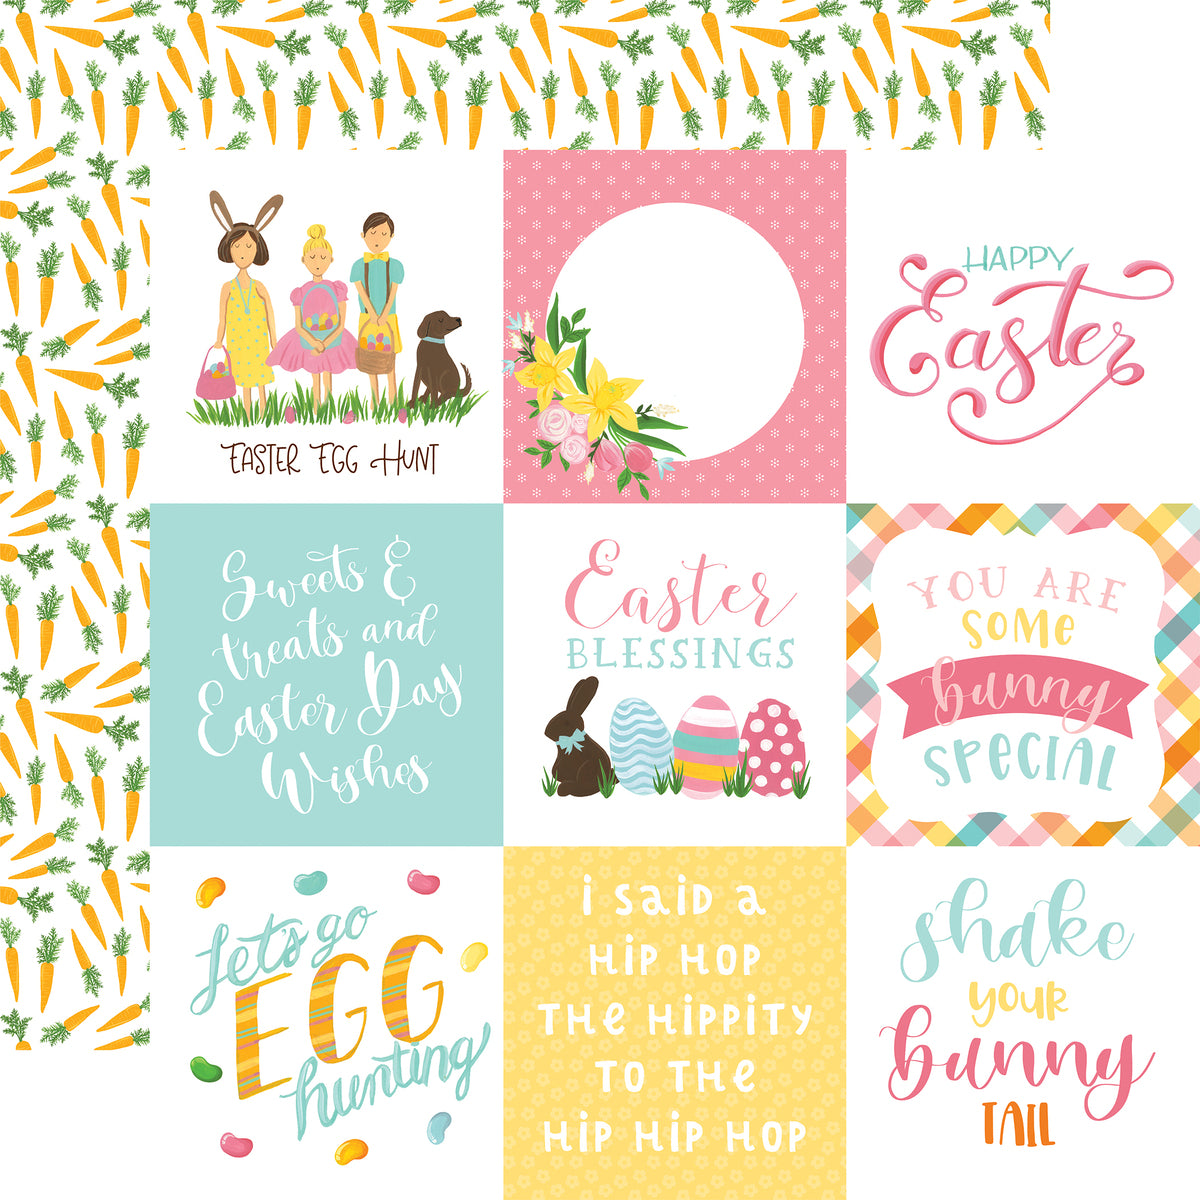 I Love Easter 4x4 journaling cards on 12x12 double-sided patterned paper